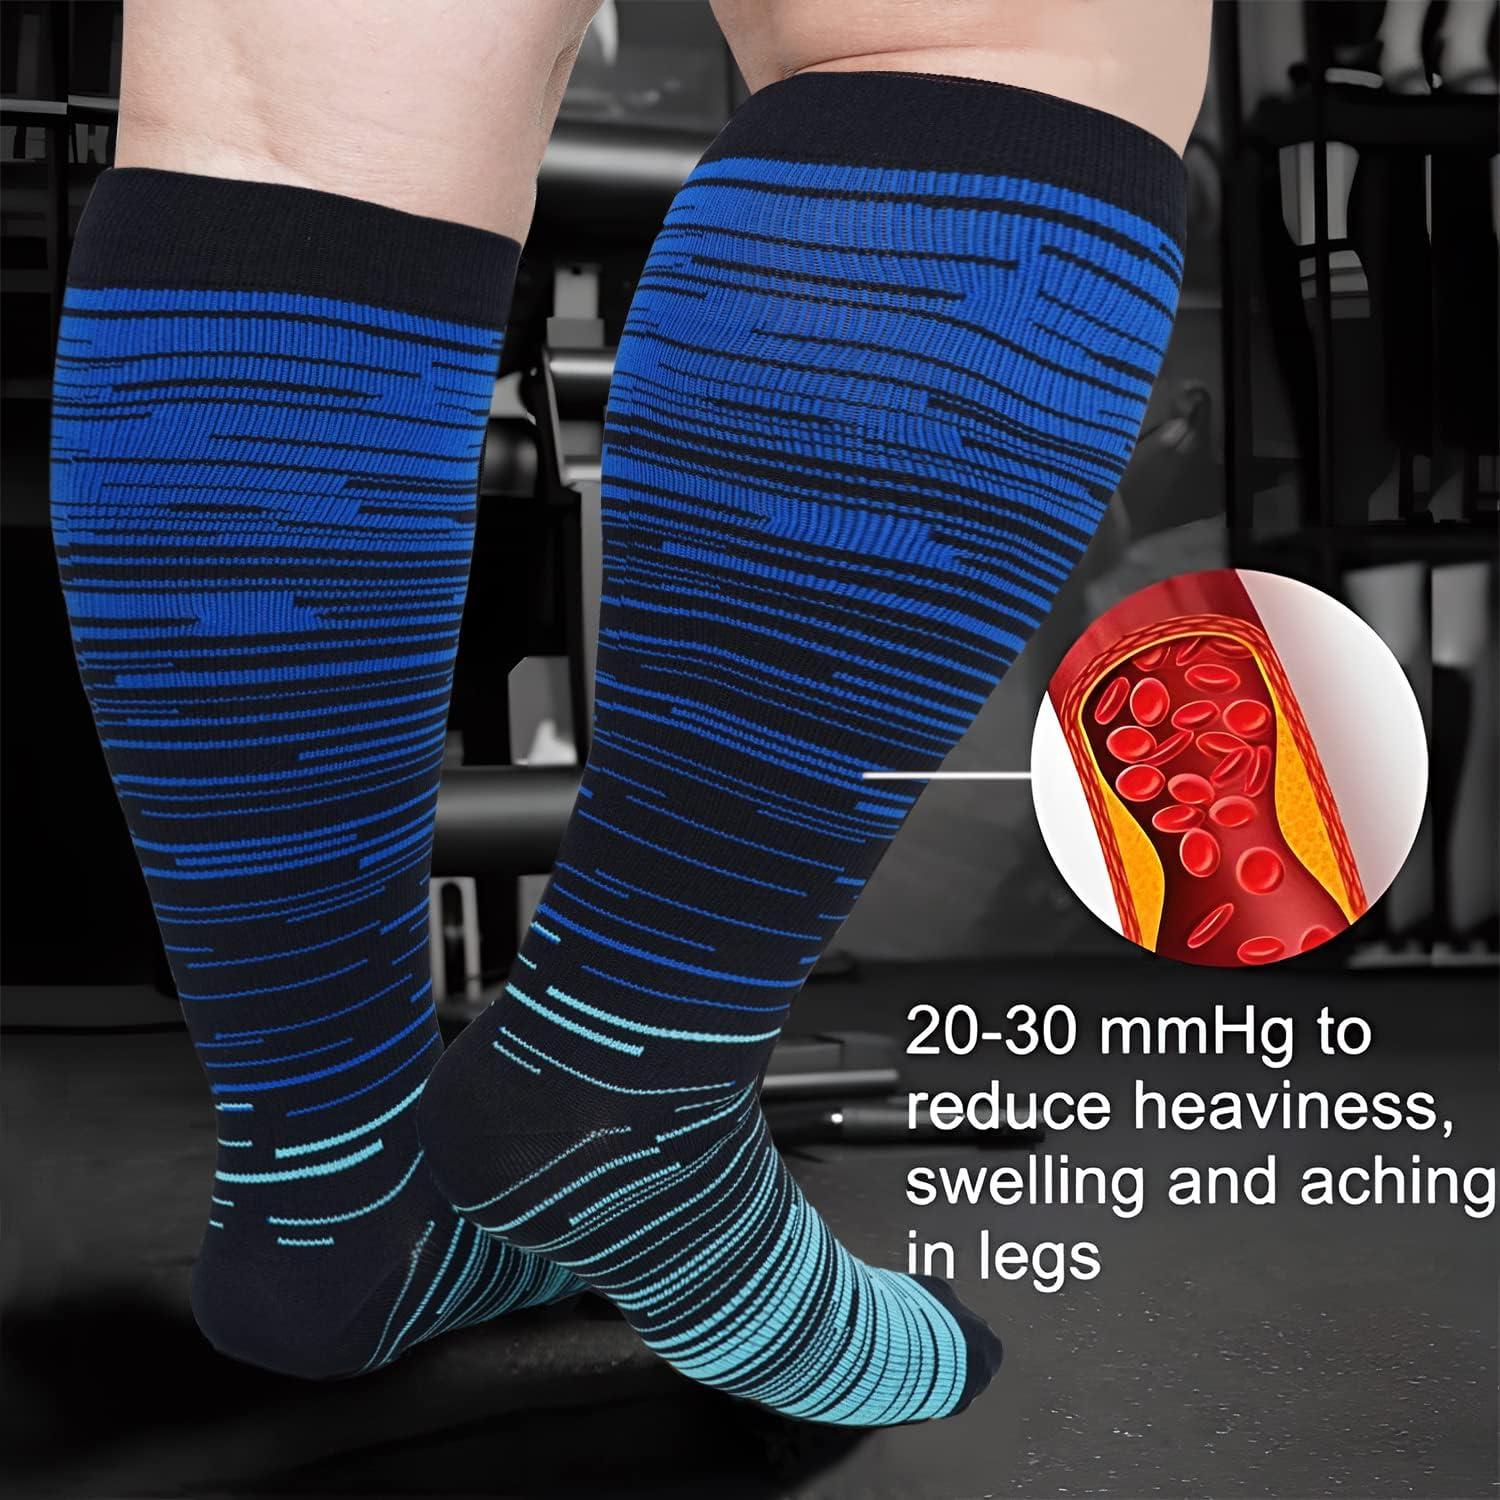 3XL Extra Wide Compression Leggings for Swelling 20-30mmHg